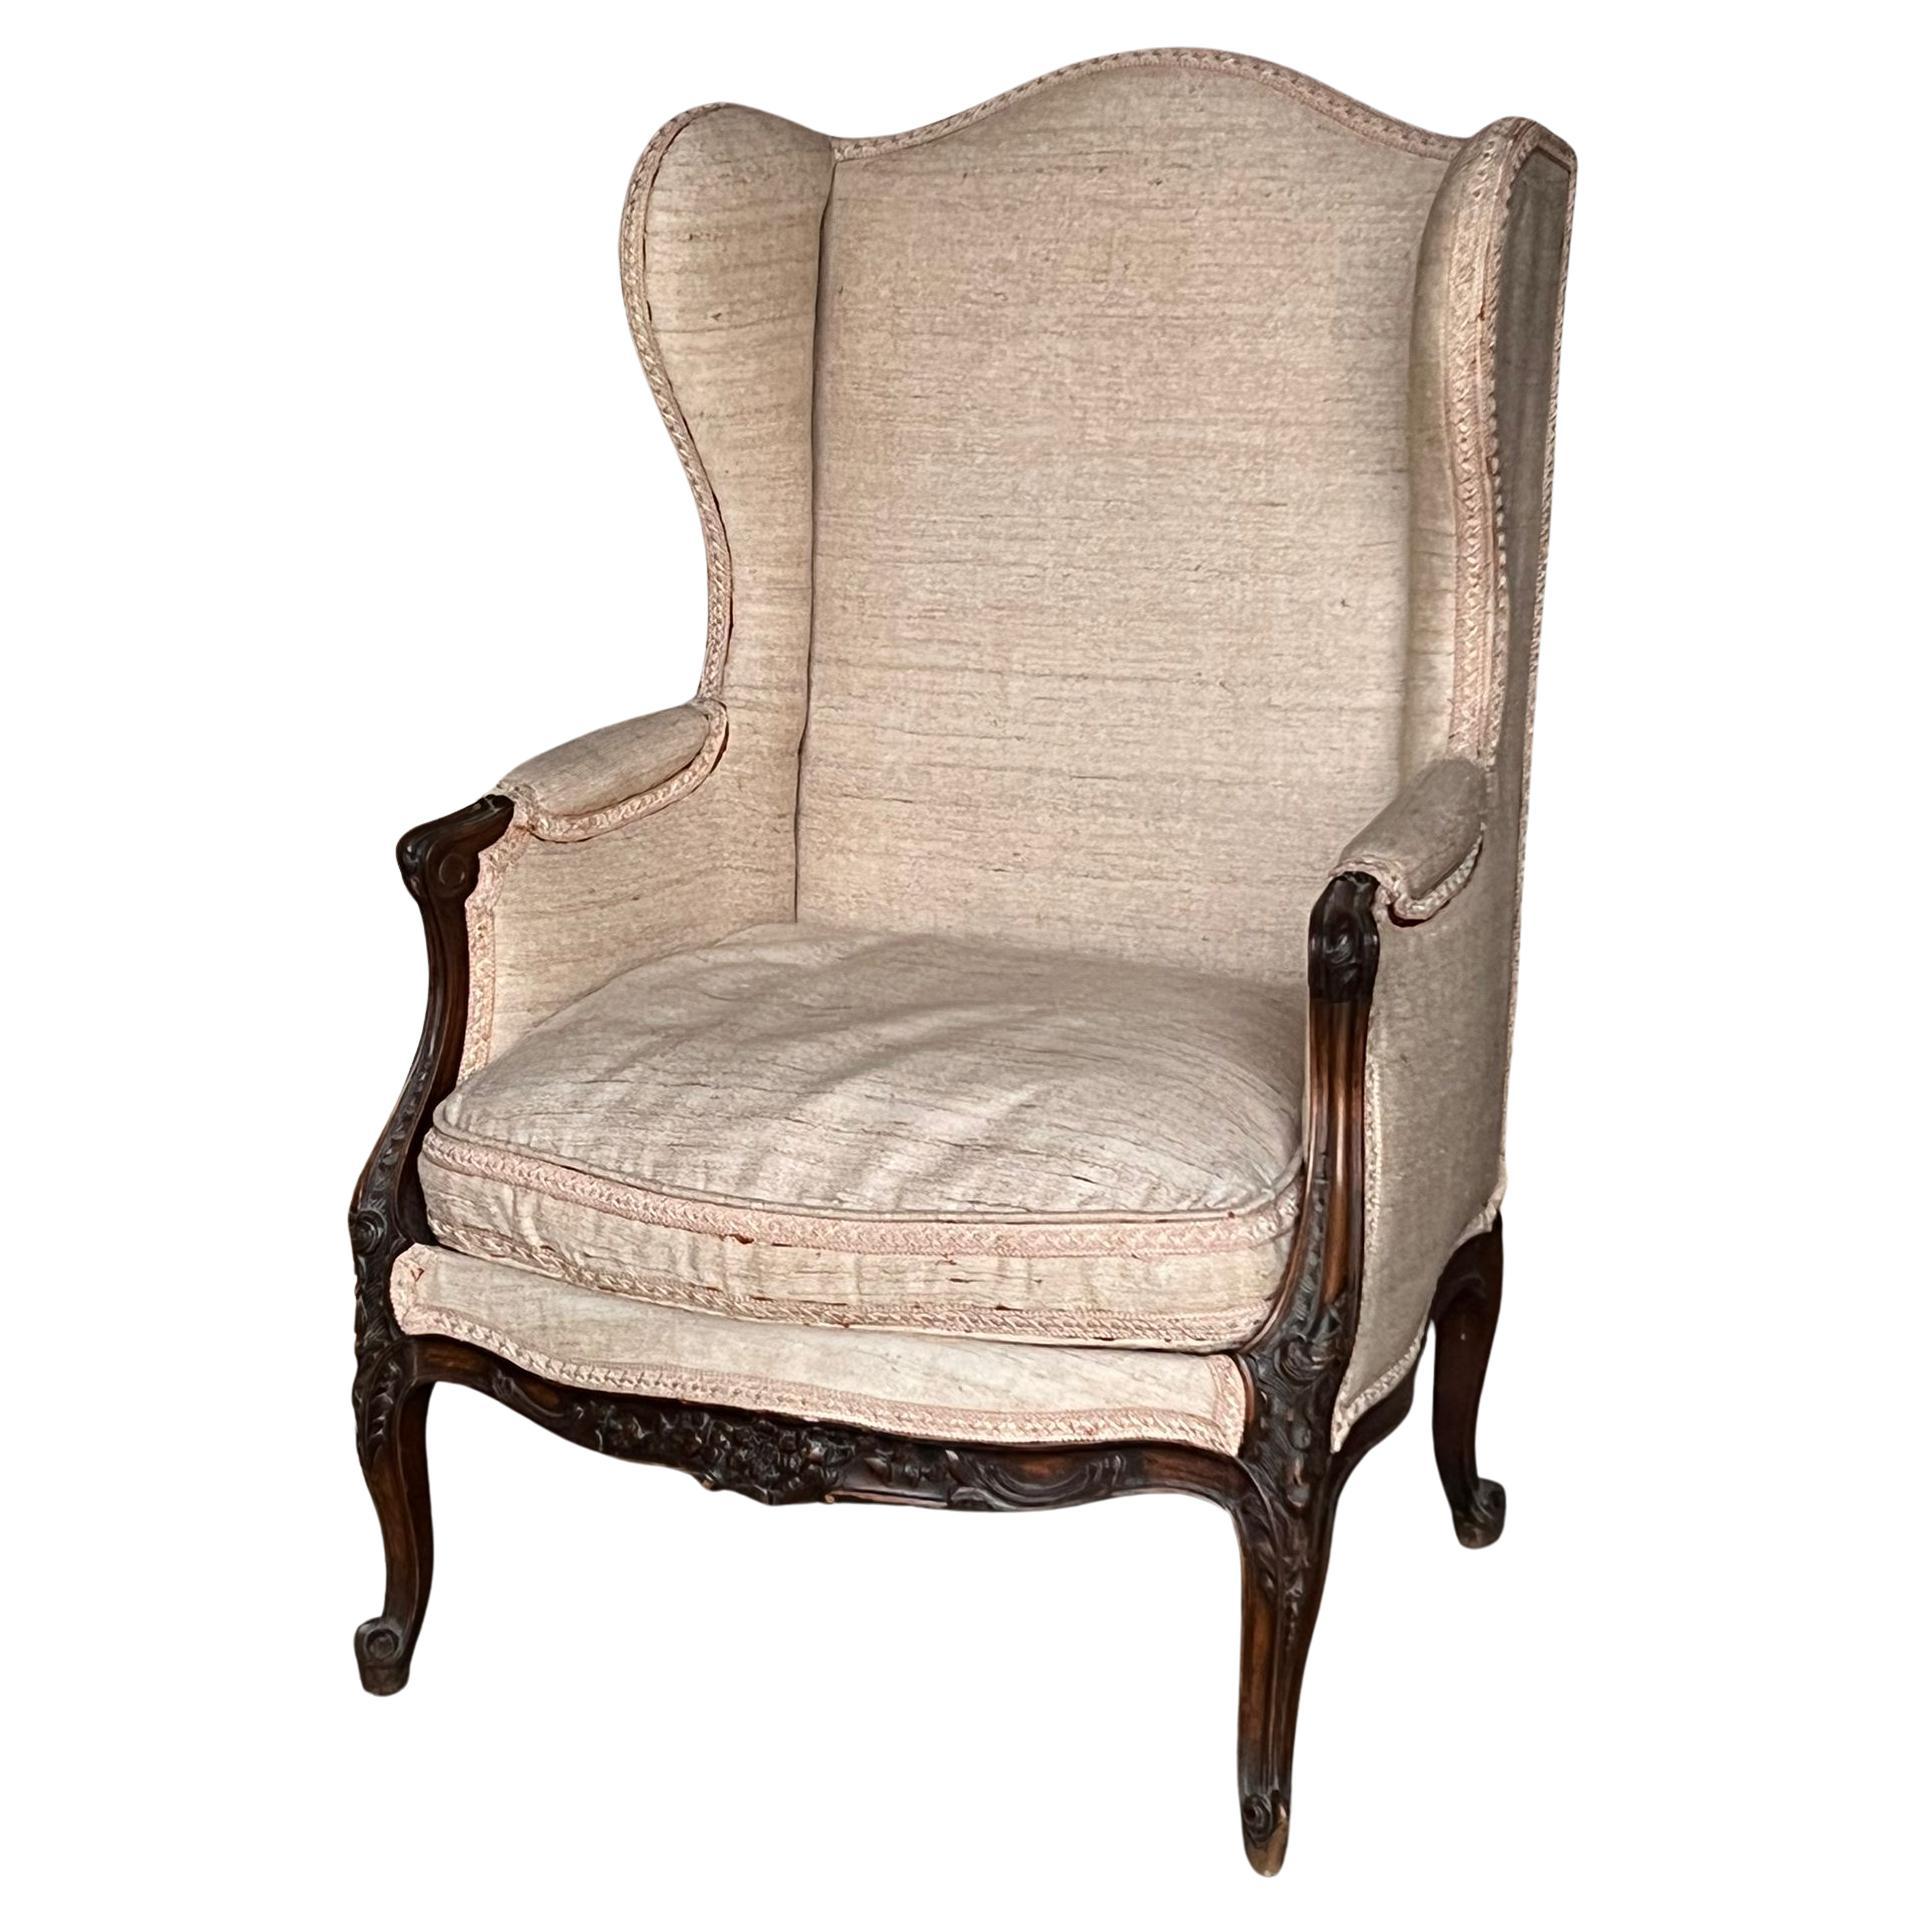 Lovely French Wing Back Arm Chair